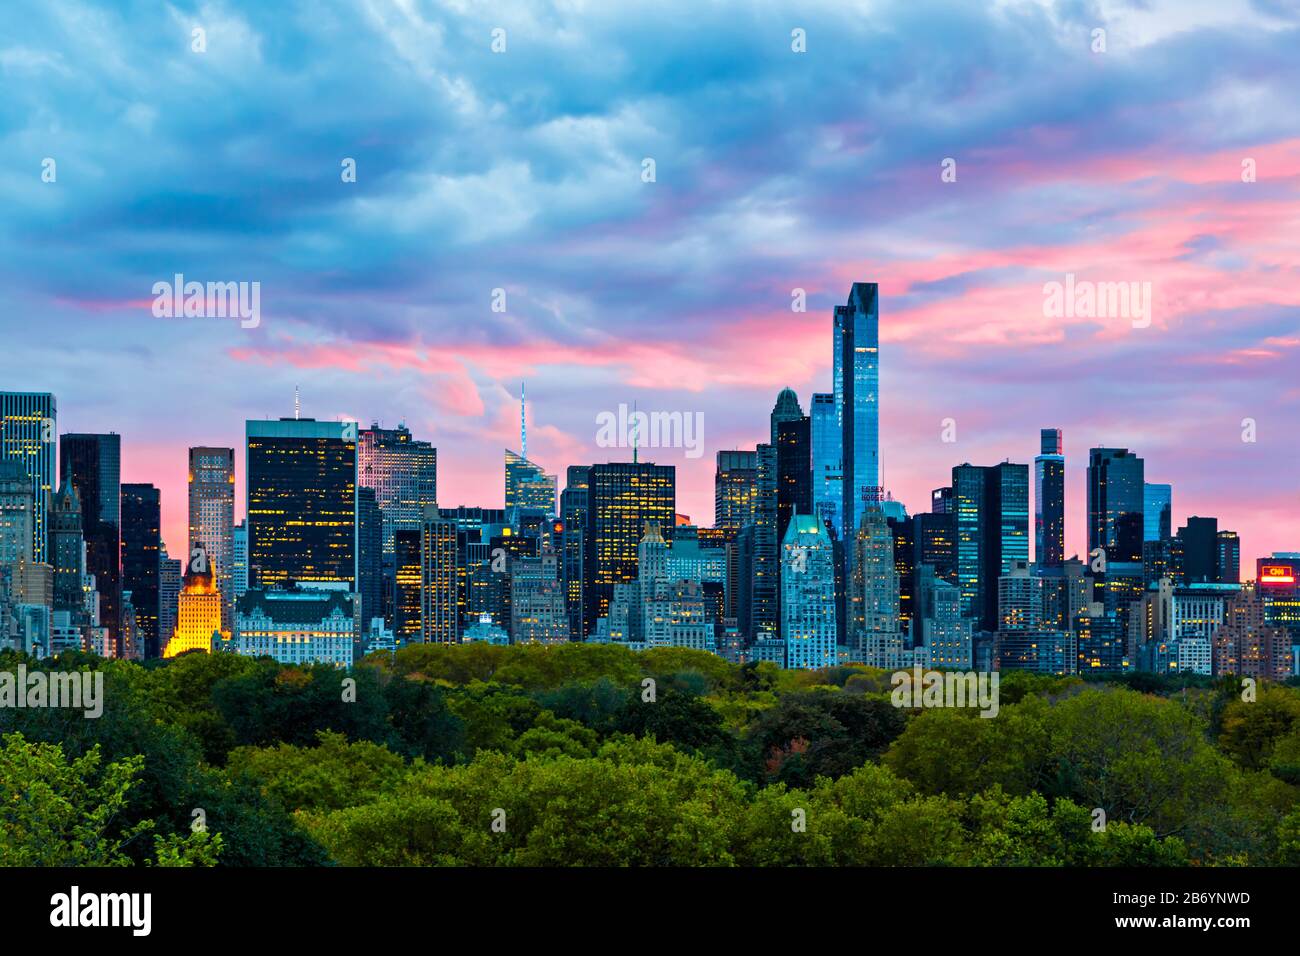 Skyline seen over Central Park at dusk, New York City, New York State, United States of America. Stock Photo